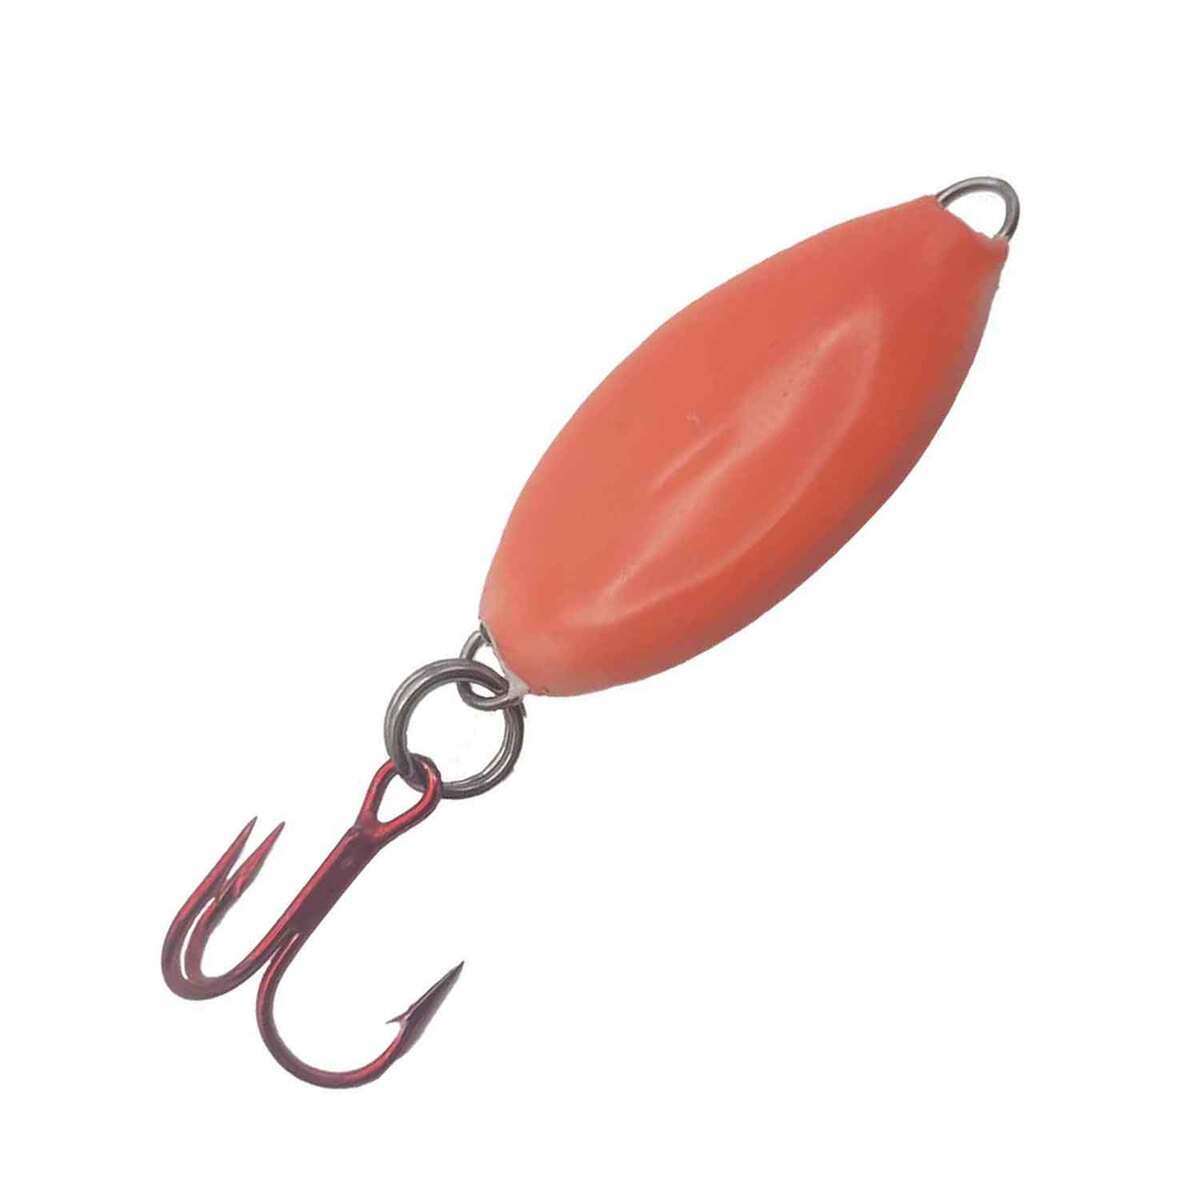 Ned's Bait Box Pout Bomb Jigging Spoon - 3in - Red Glow by Sportsman's Warehouse